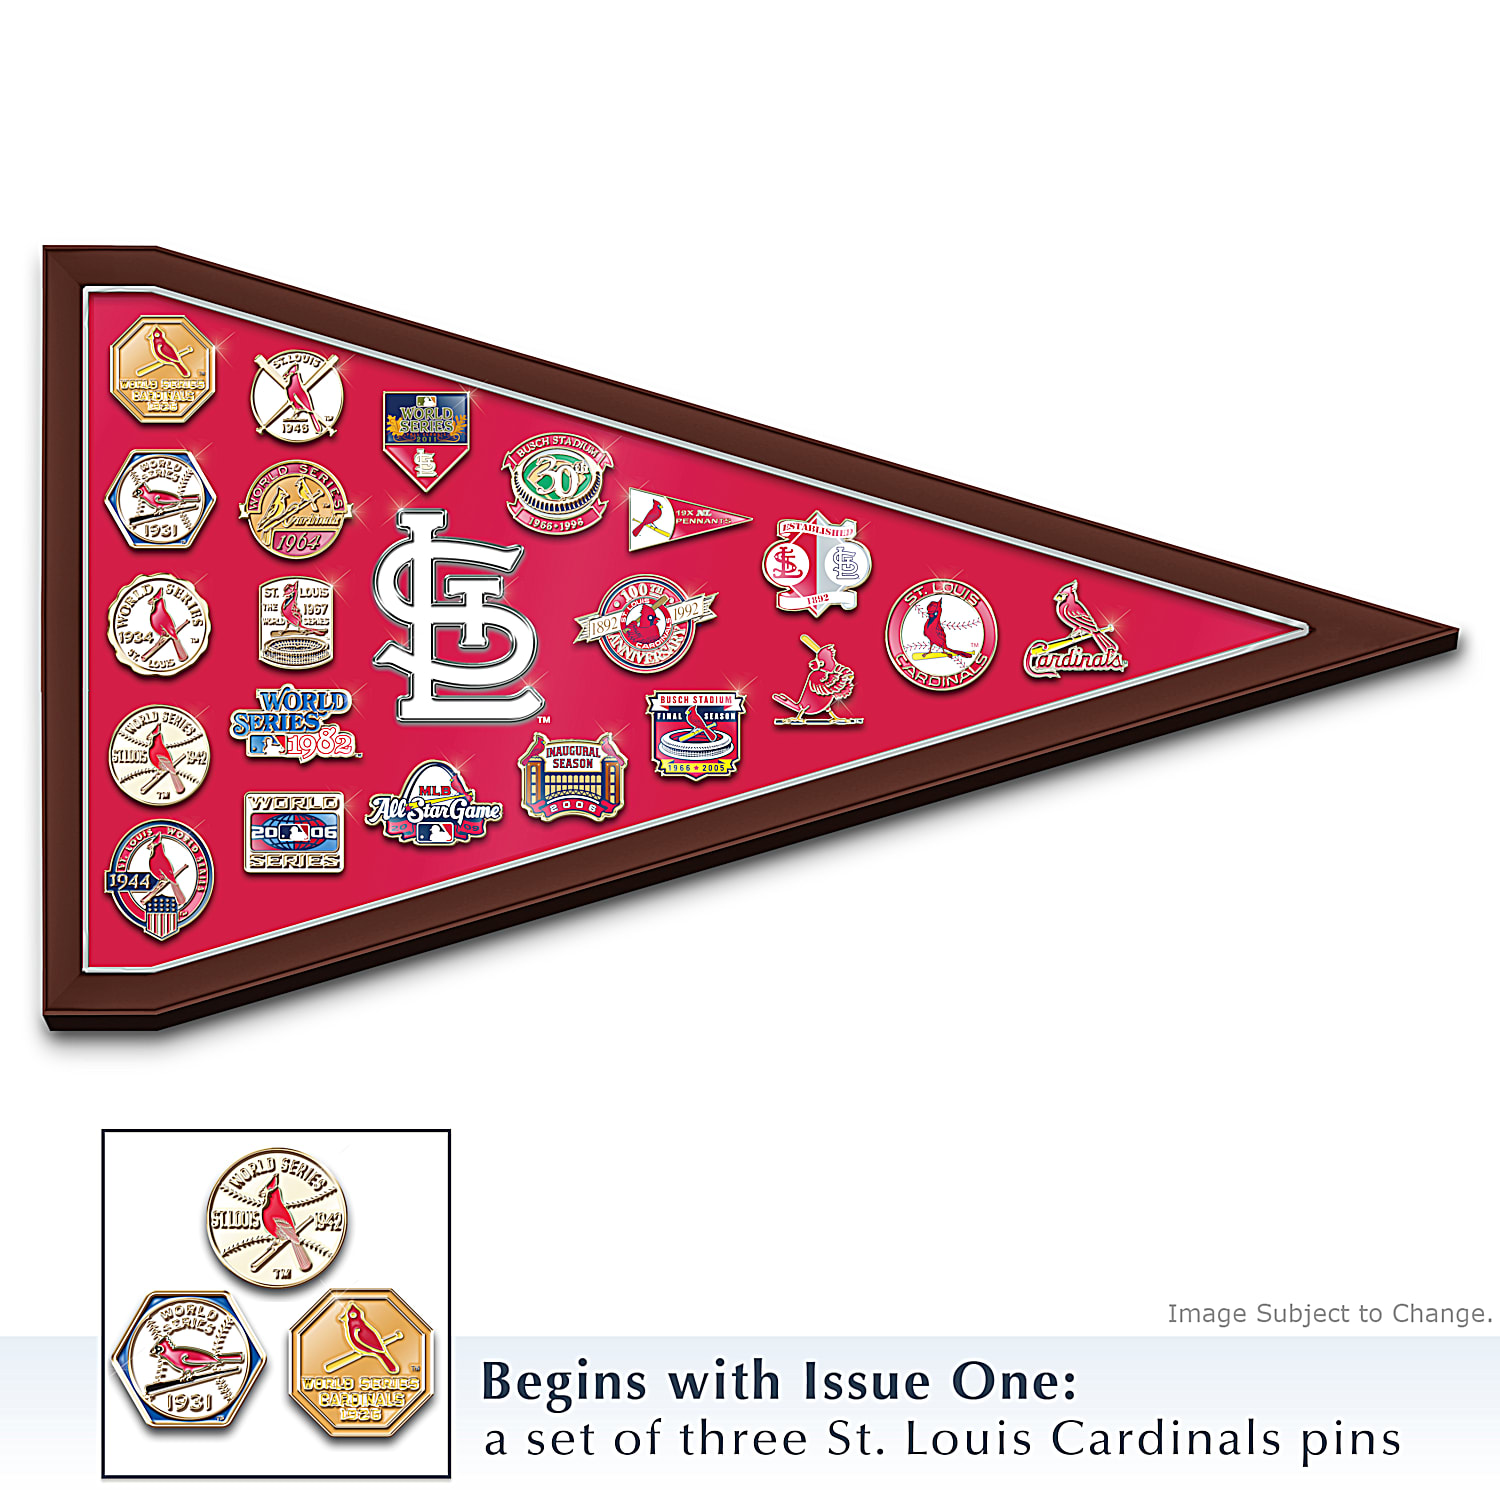 St. Louis Cardinals MLB Commemorative Pin Collection Featuring 21